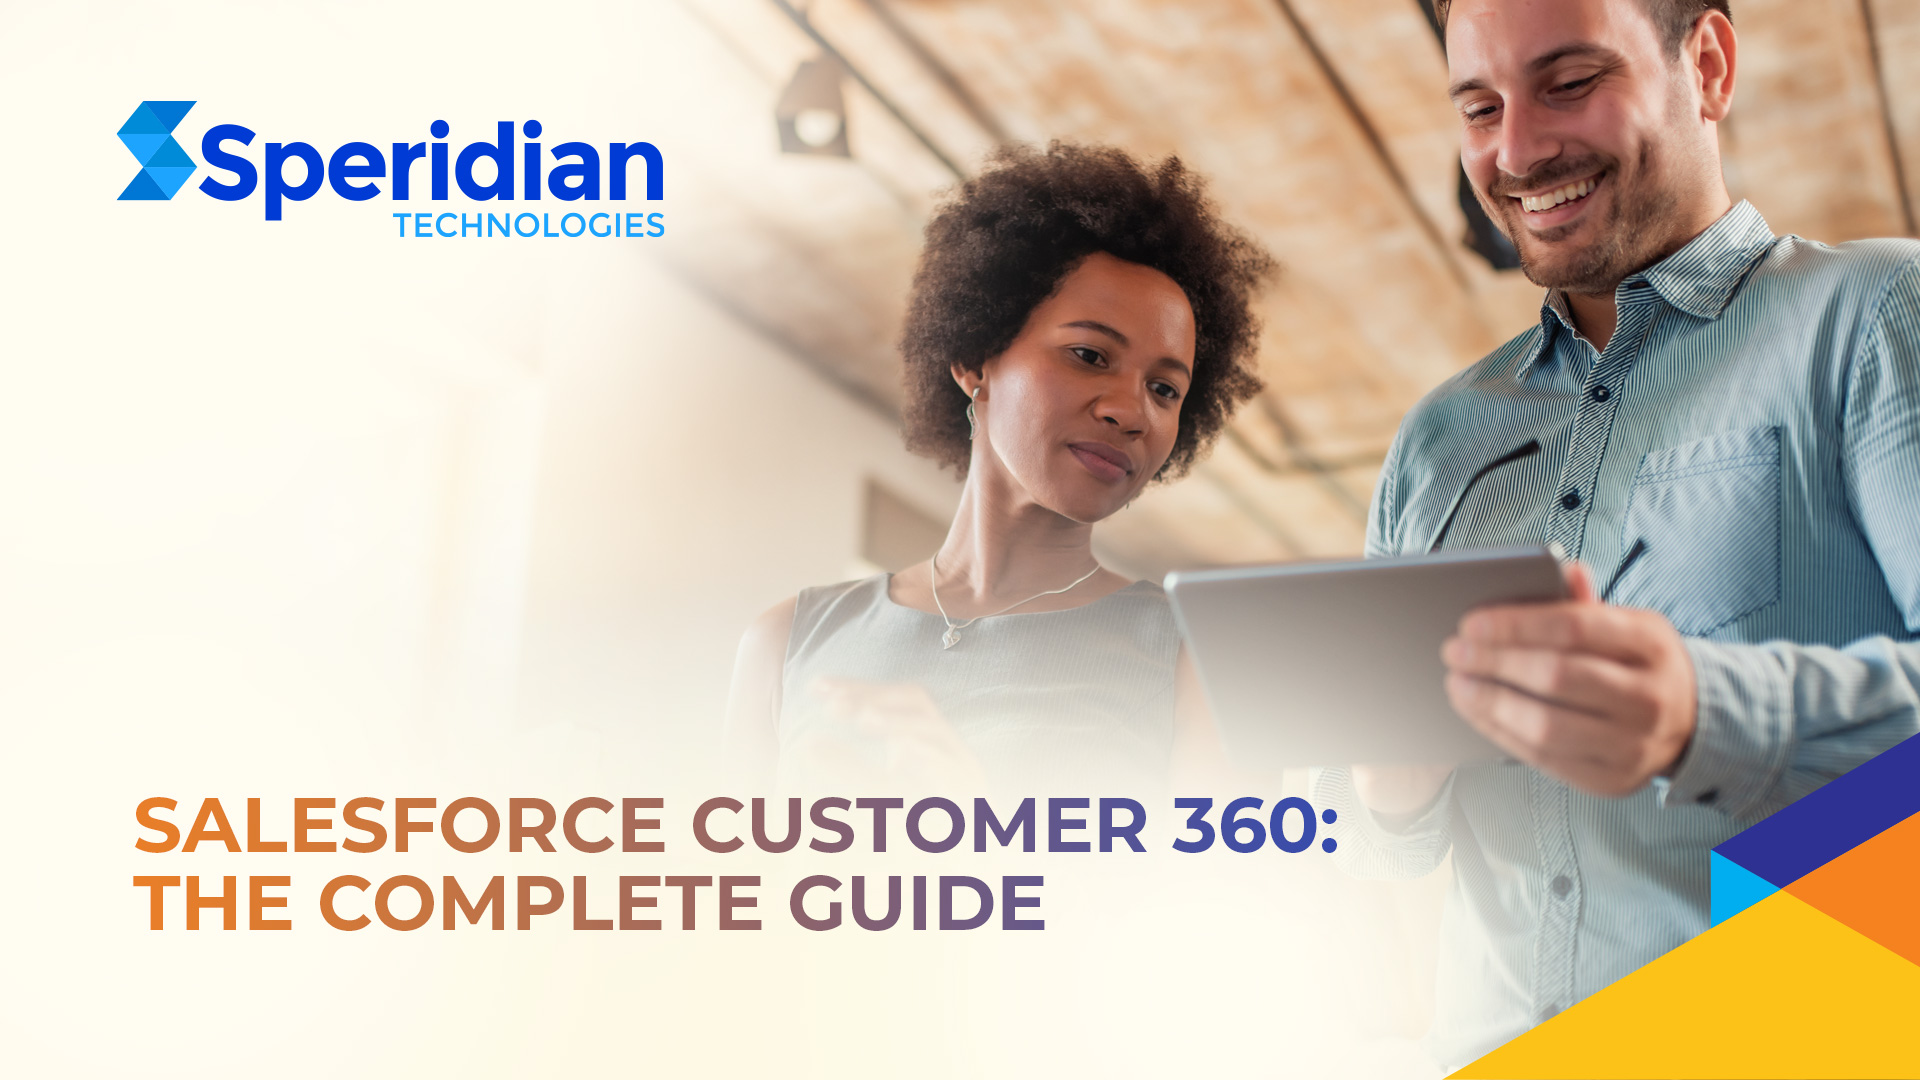 Salesforce Customer 360: The Complete Guide